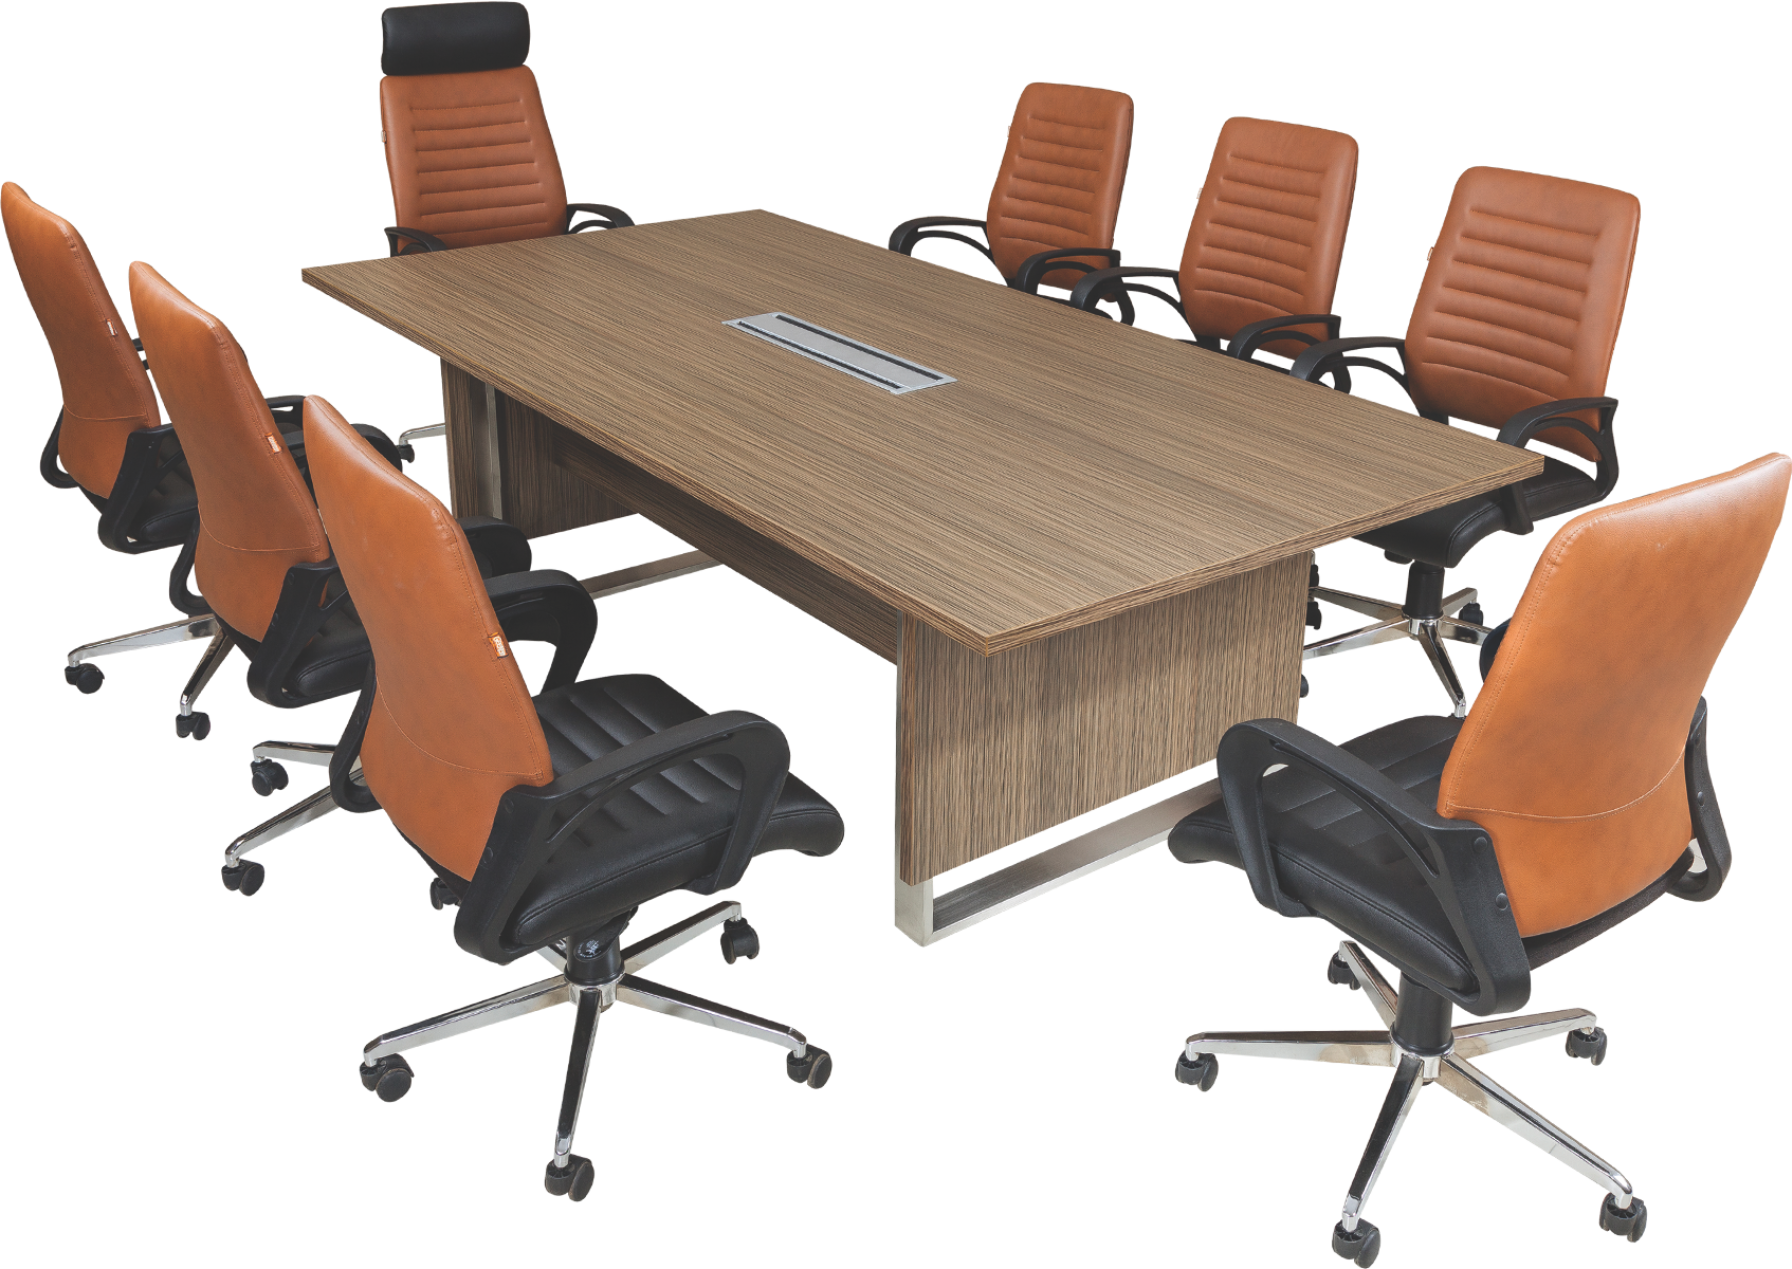 CONFERENCE 10 - Conference Table